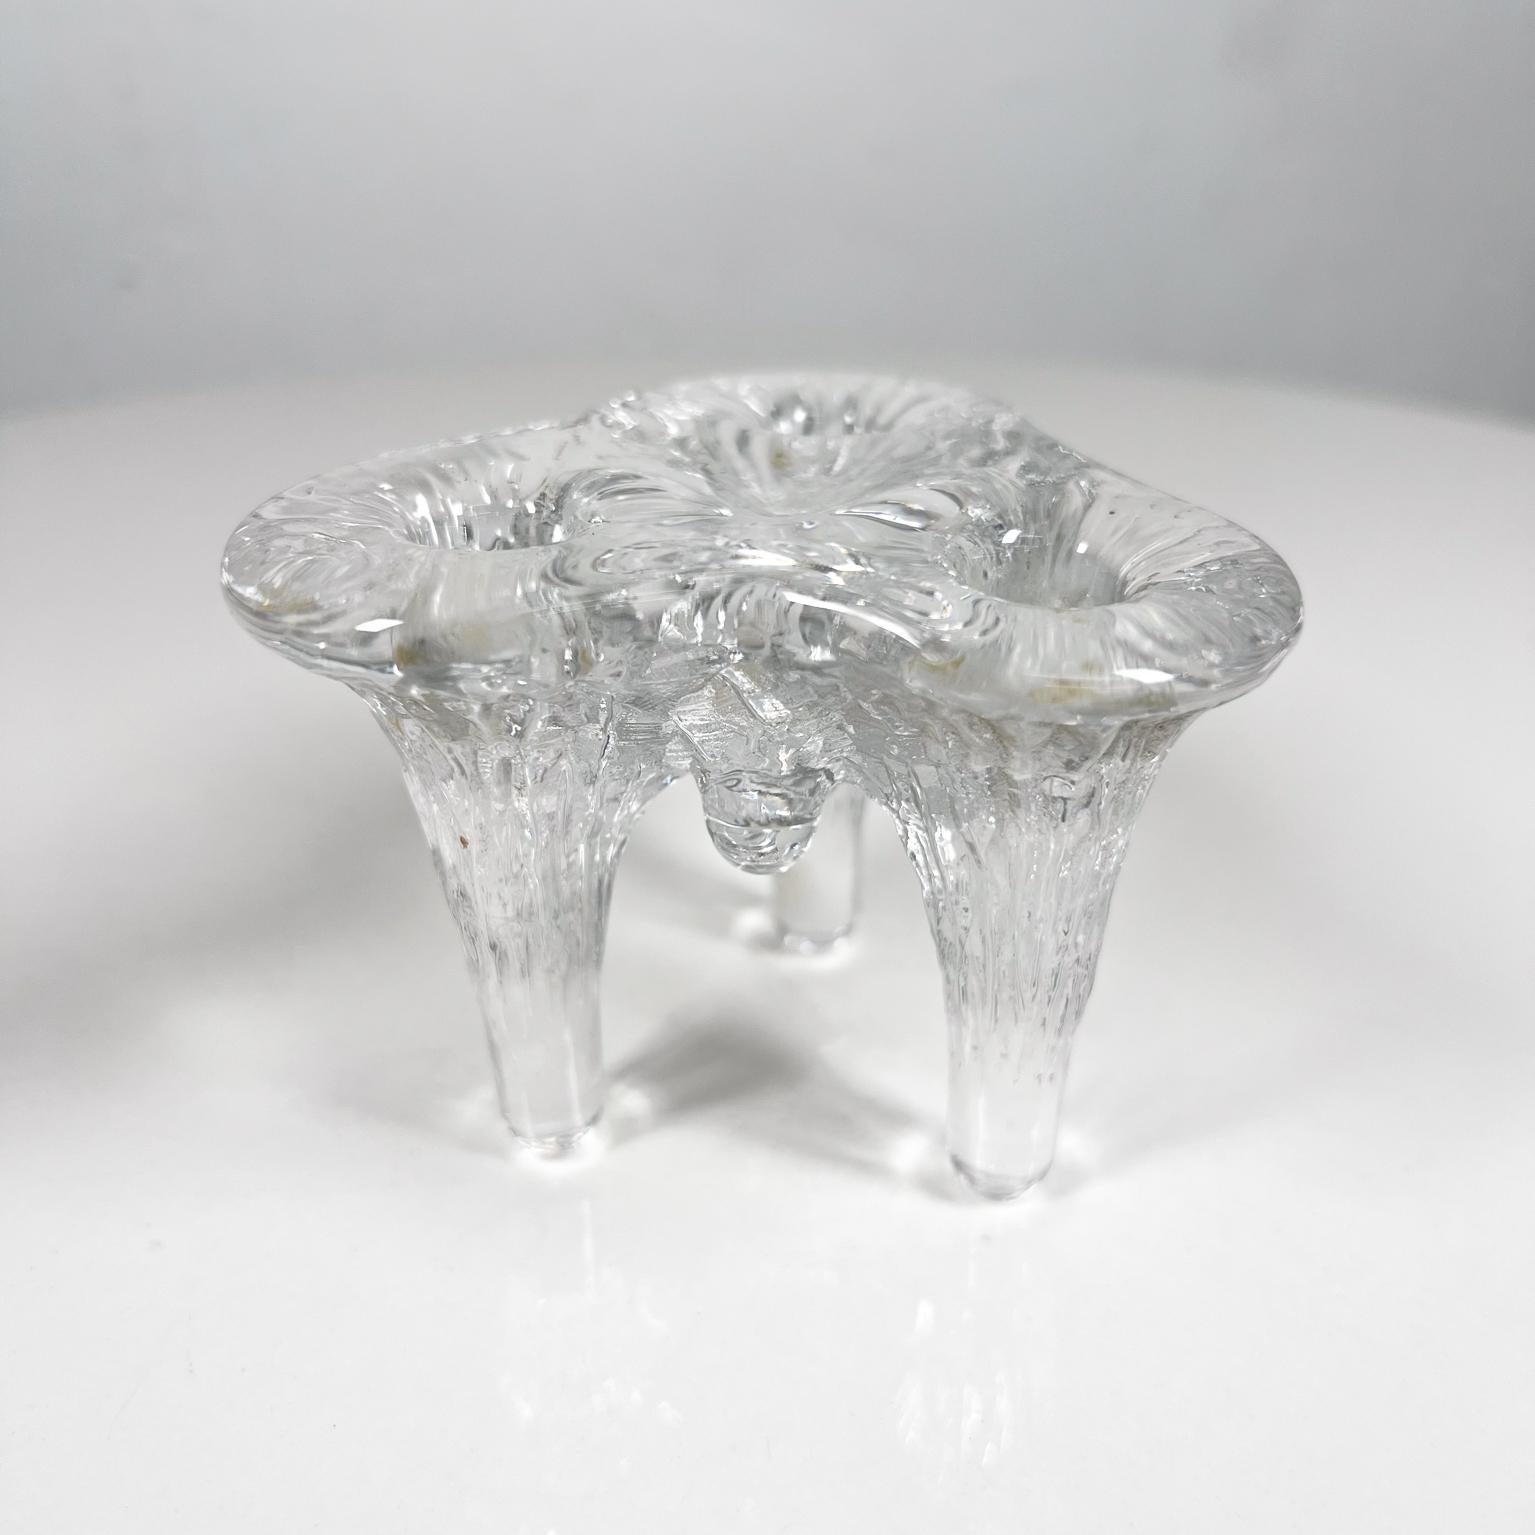 1970s Three Taper Istapo Candle Holder Art Glass
Designed by Göran Wärff for Kosta Boda Sweden
Handcrafted to represent dripping icicles.
3.5 diam x 2.75 h
Preowned vintage condition
See images provided.